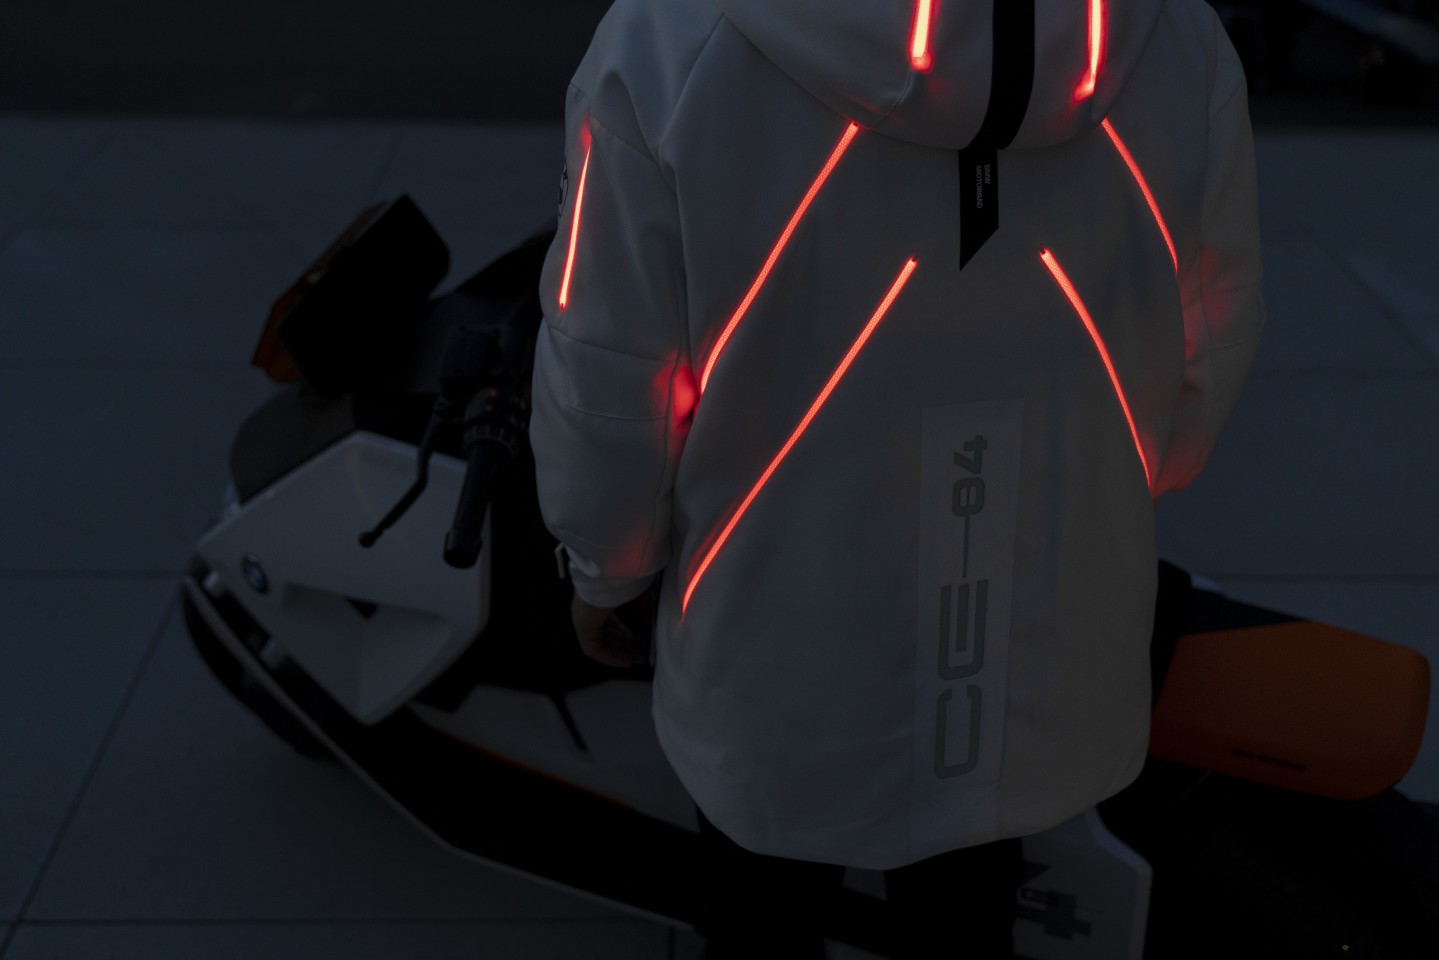 The jacket has its own power source, enabling it to communicate with the bike and double the brake lights, as well as to charge your phone inductively while it's in your pocket